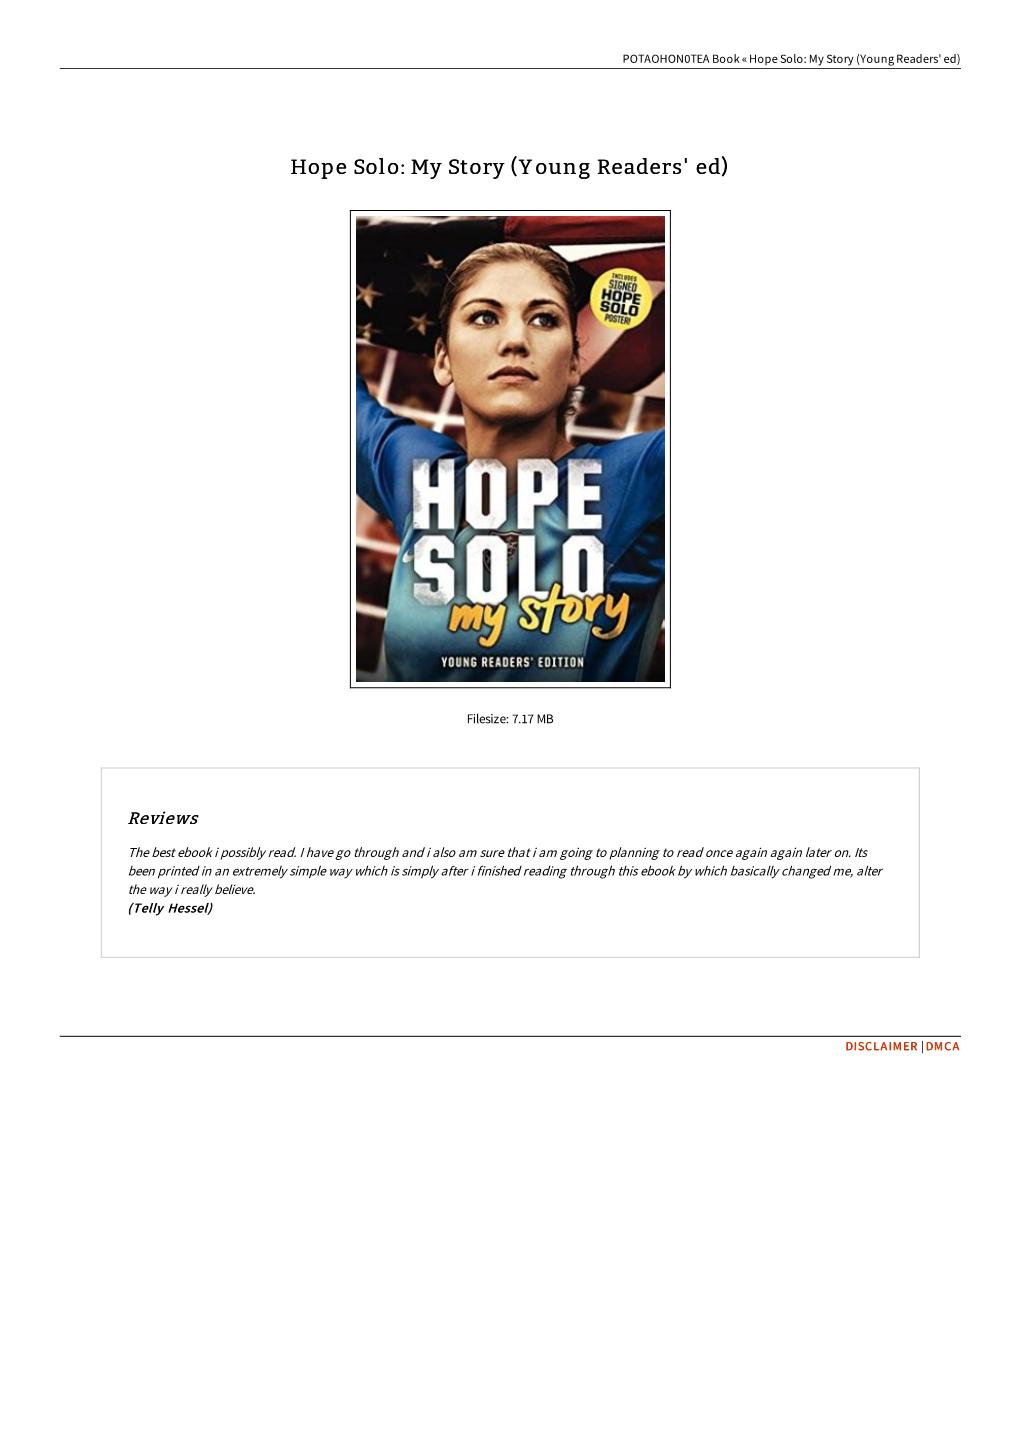 Read Ebook « Hope Solo: My Story (Young Readers' Ed) » IKY3ULRXHNMP